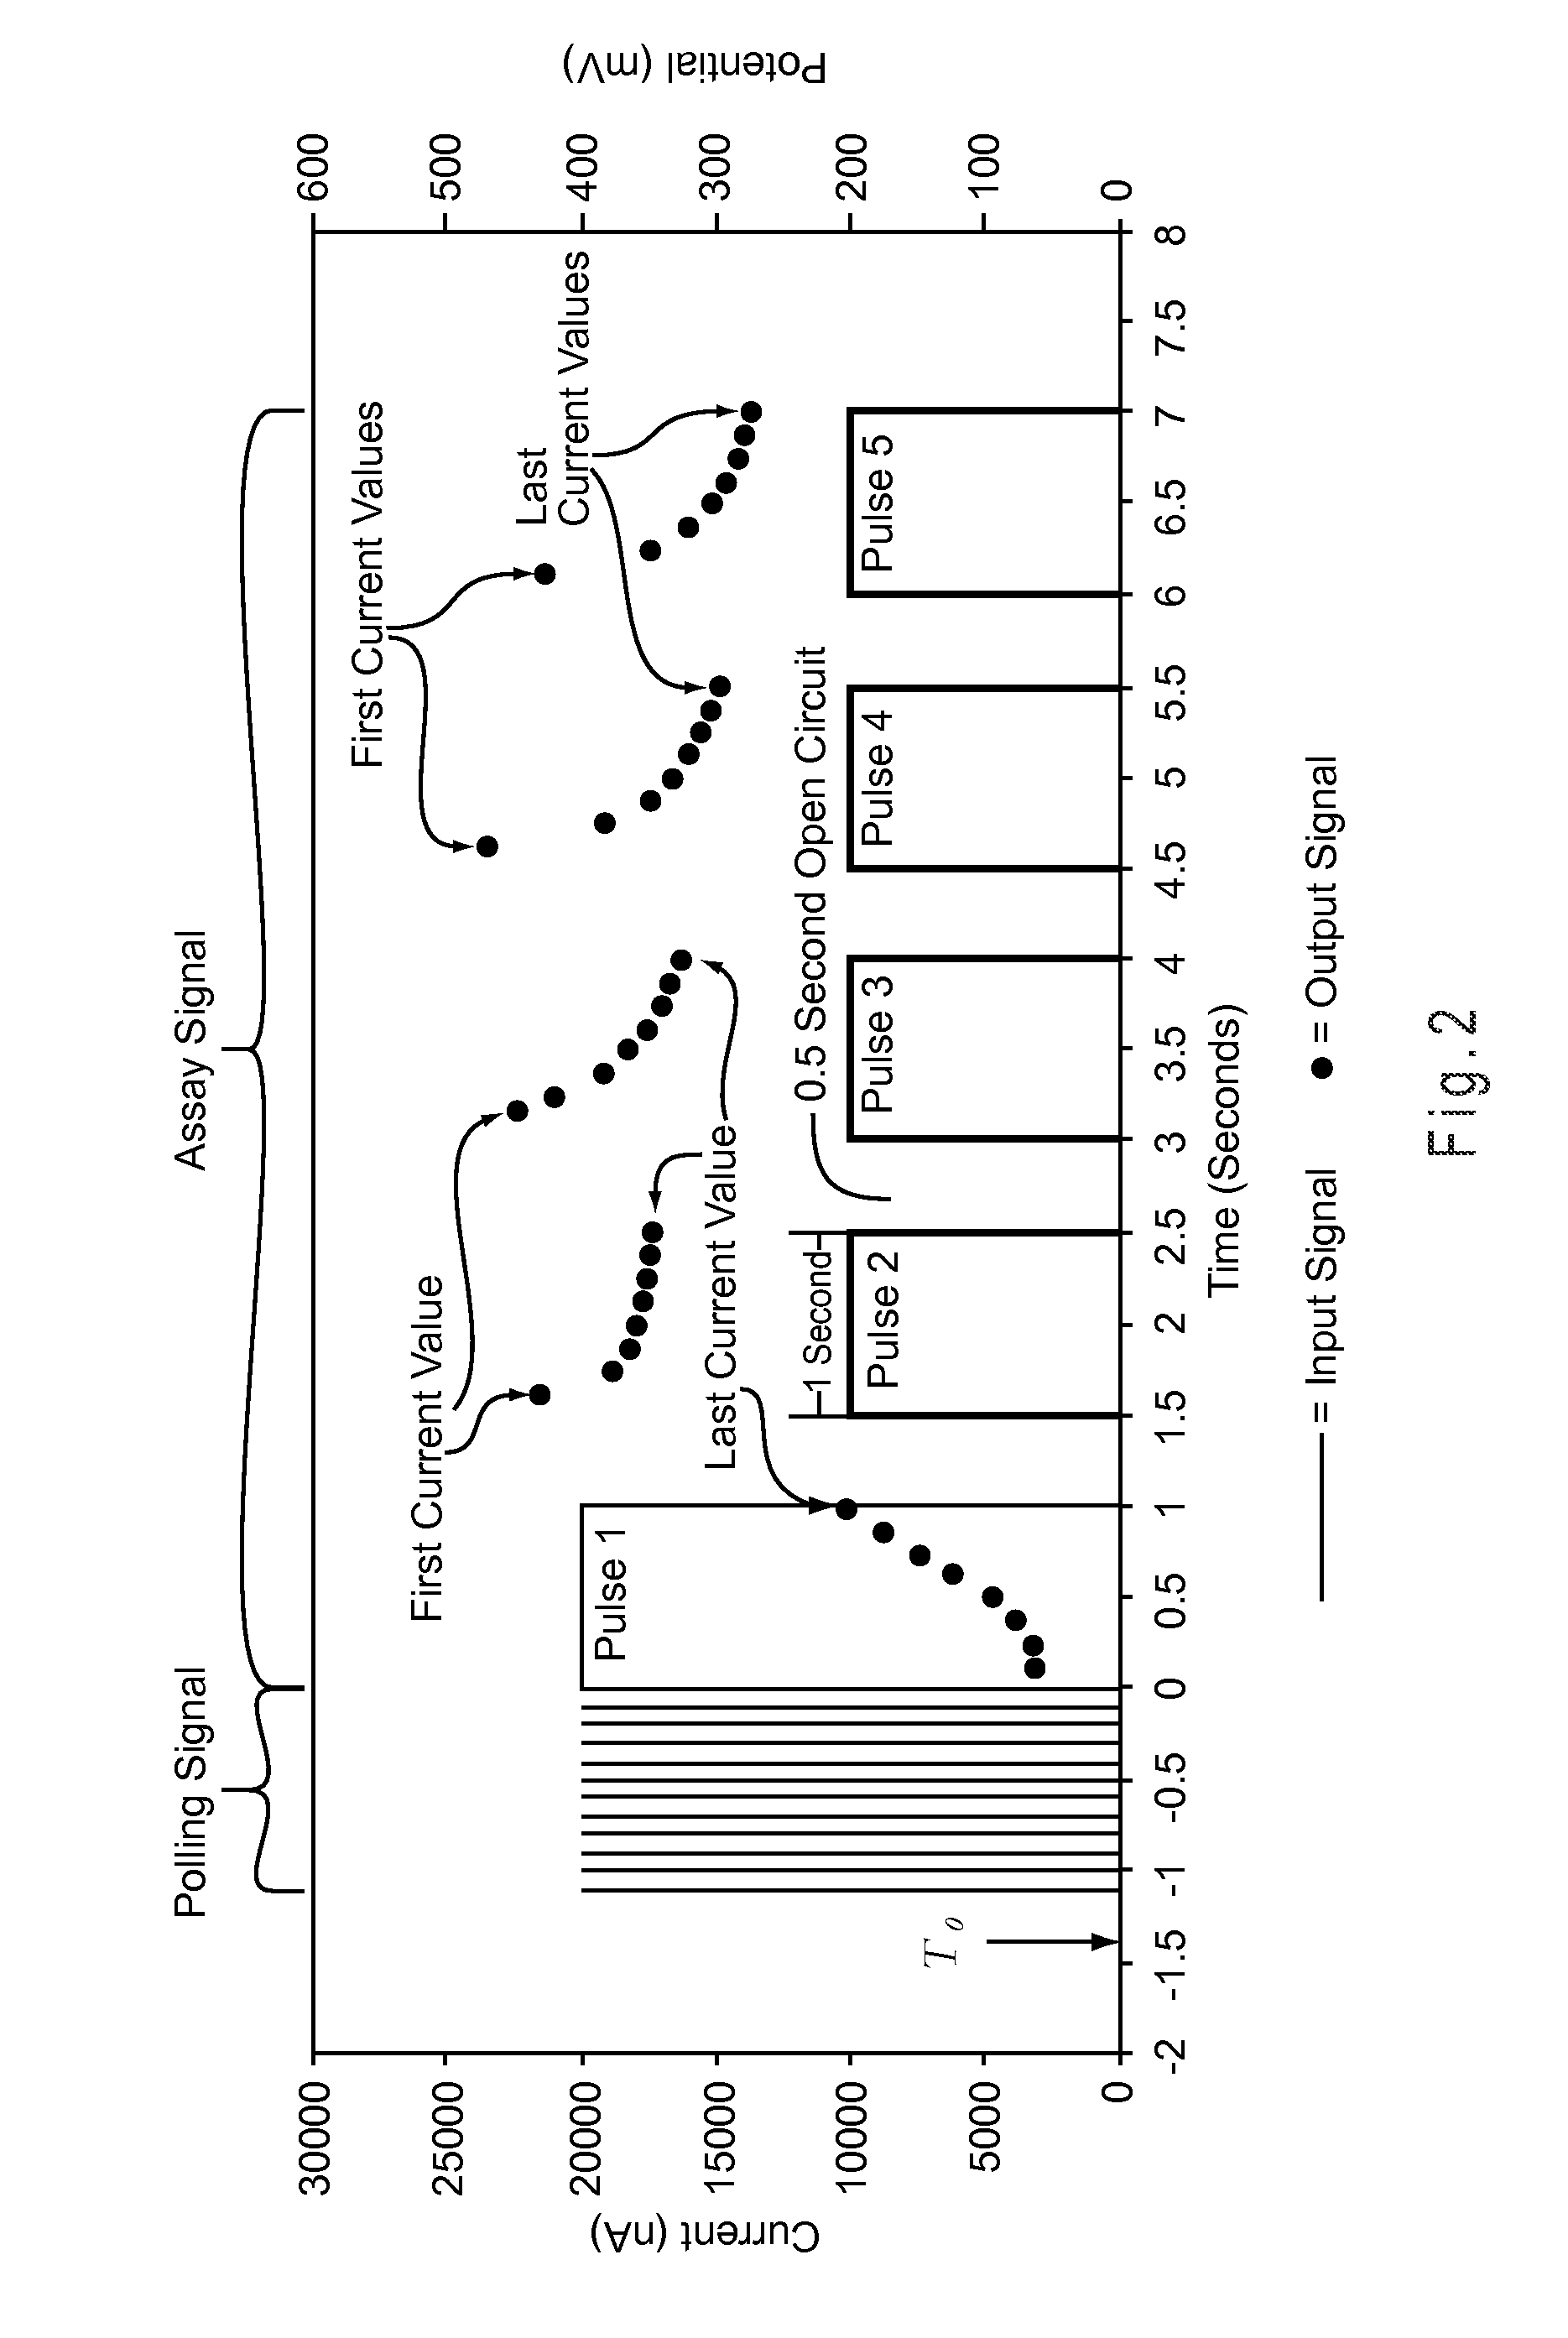 Abnormal Output Detection System For A Biosensor